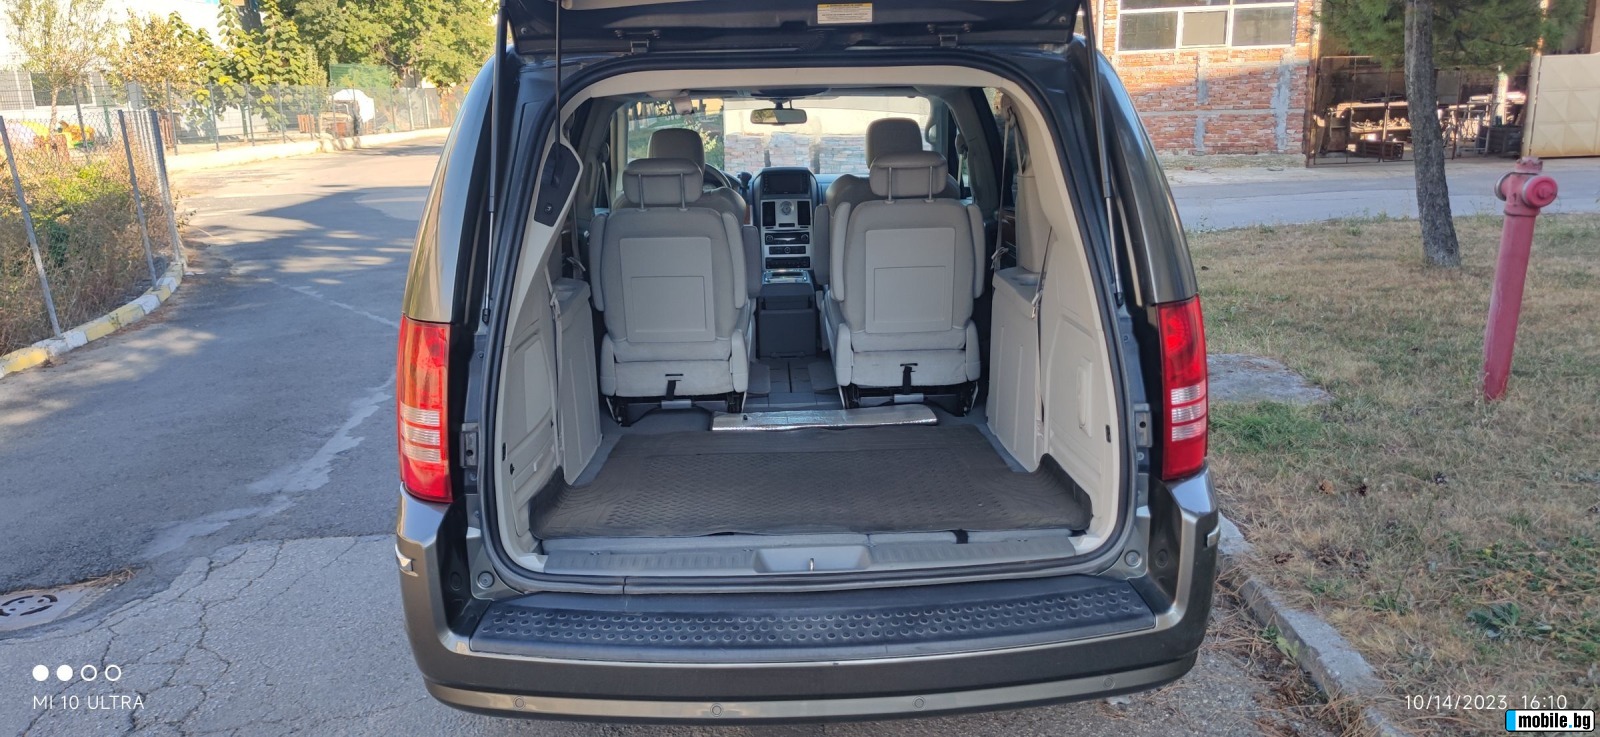 Chrysler Town and Country 4.0 Limited LPG | Mobile.bg   10